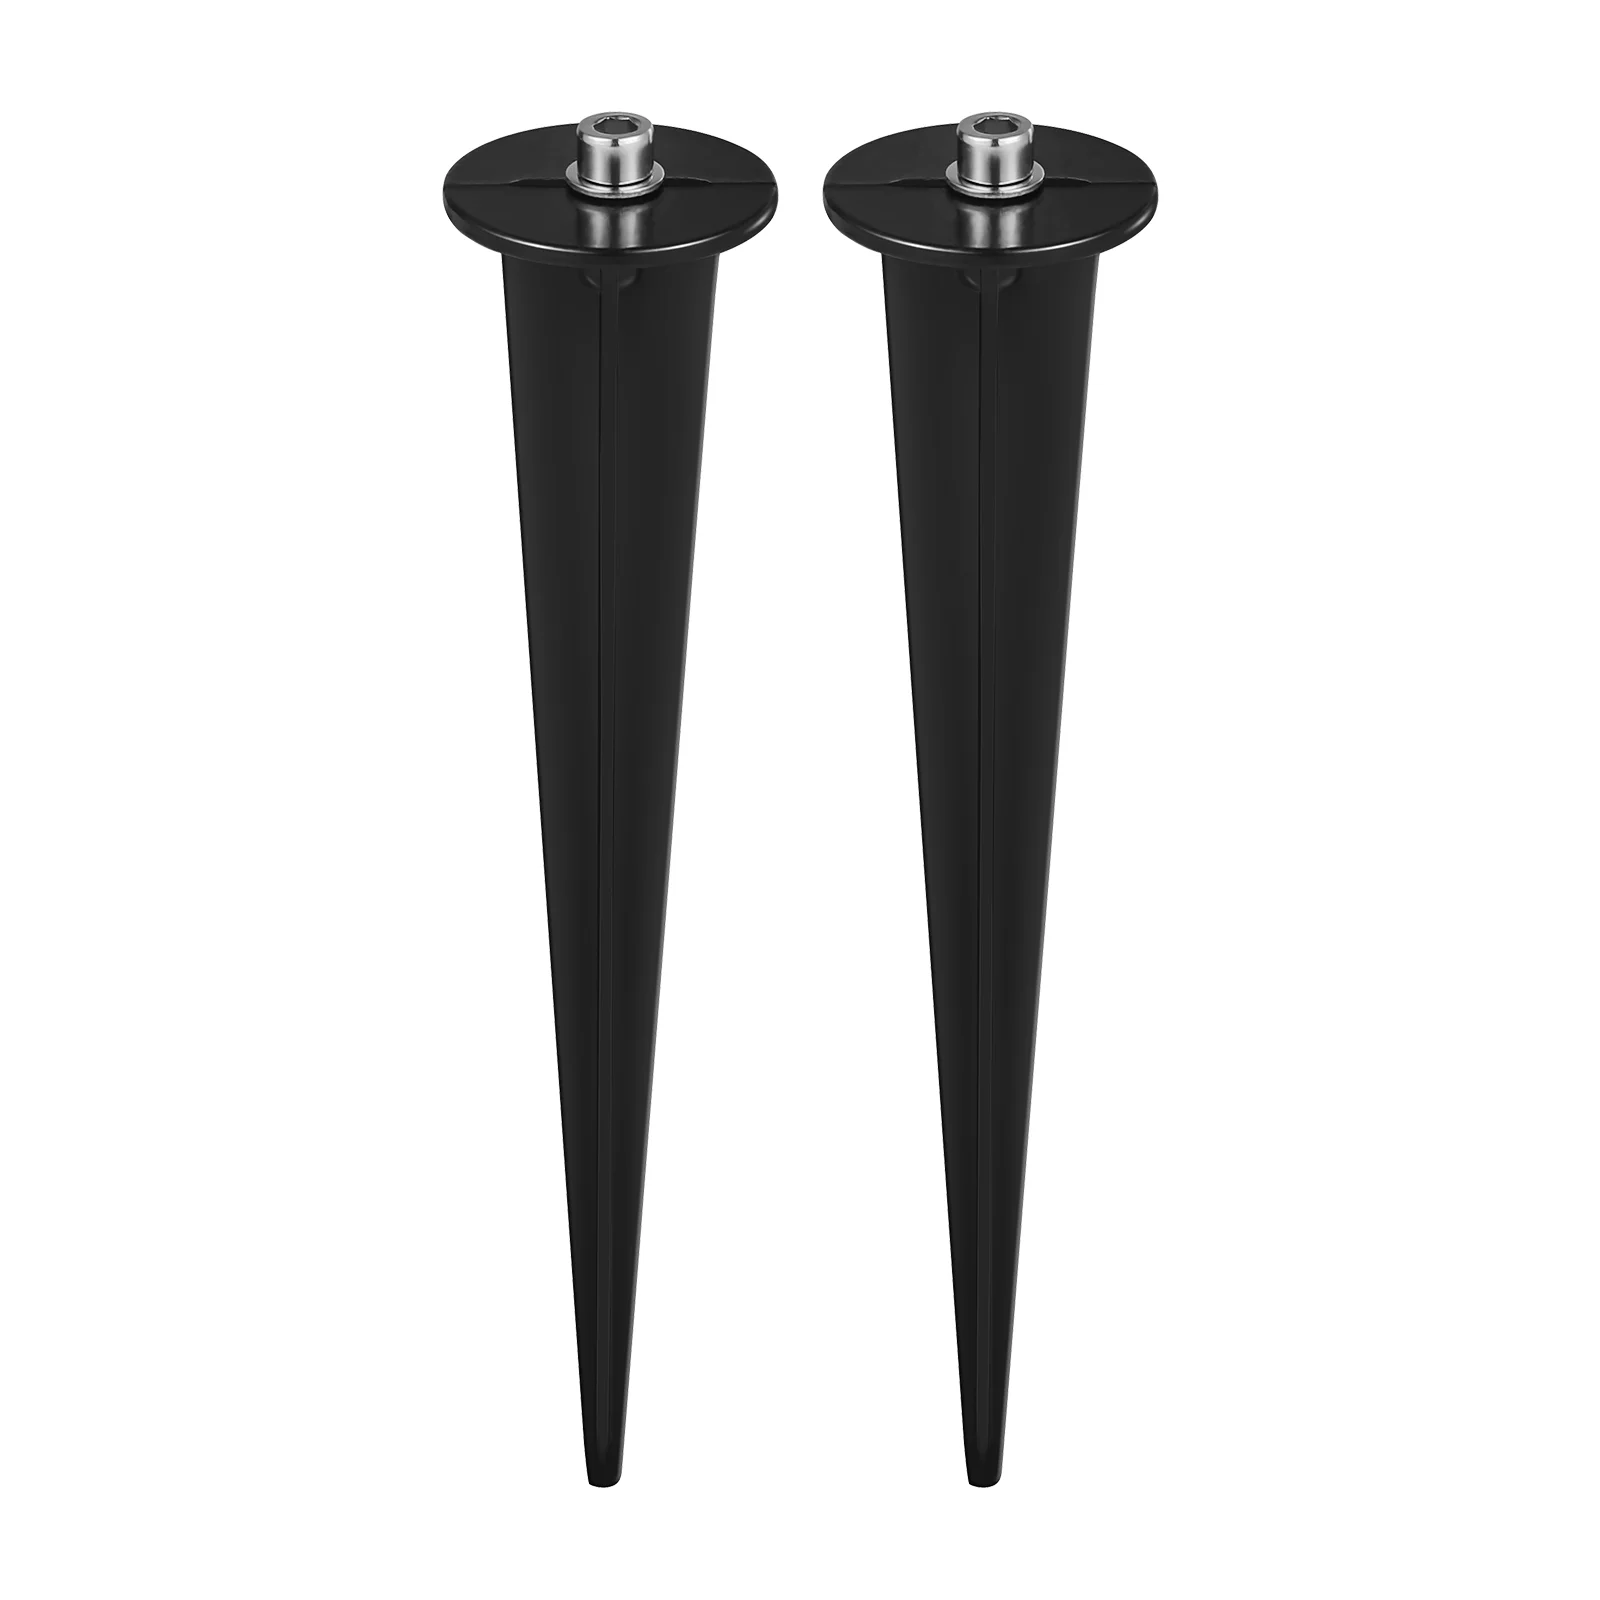 

Uonlytech 2pcs 16cm Ground Stake for Floodlights Lawn Light Ground Plugs with M5 Screws Outdoor Spotlight Accessory for Garden